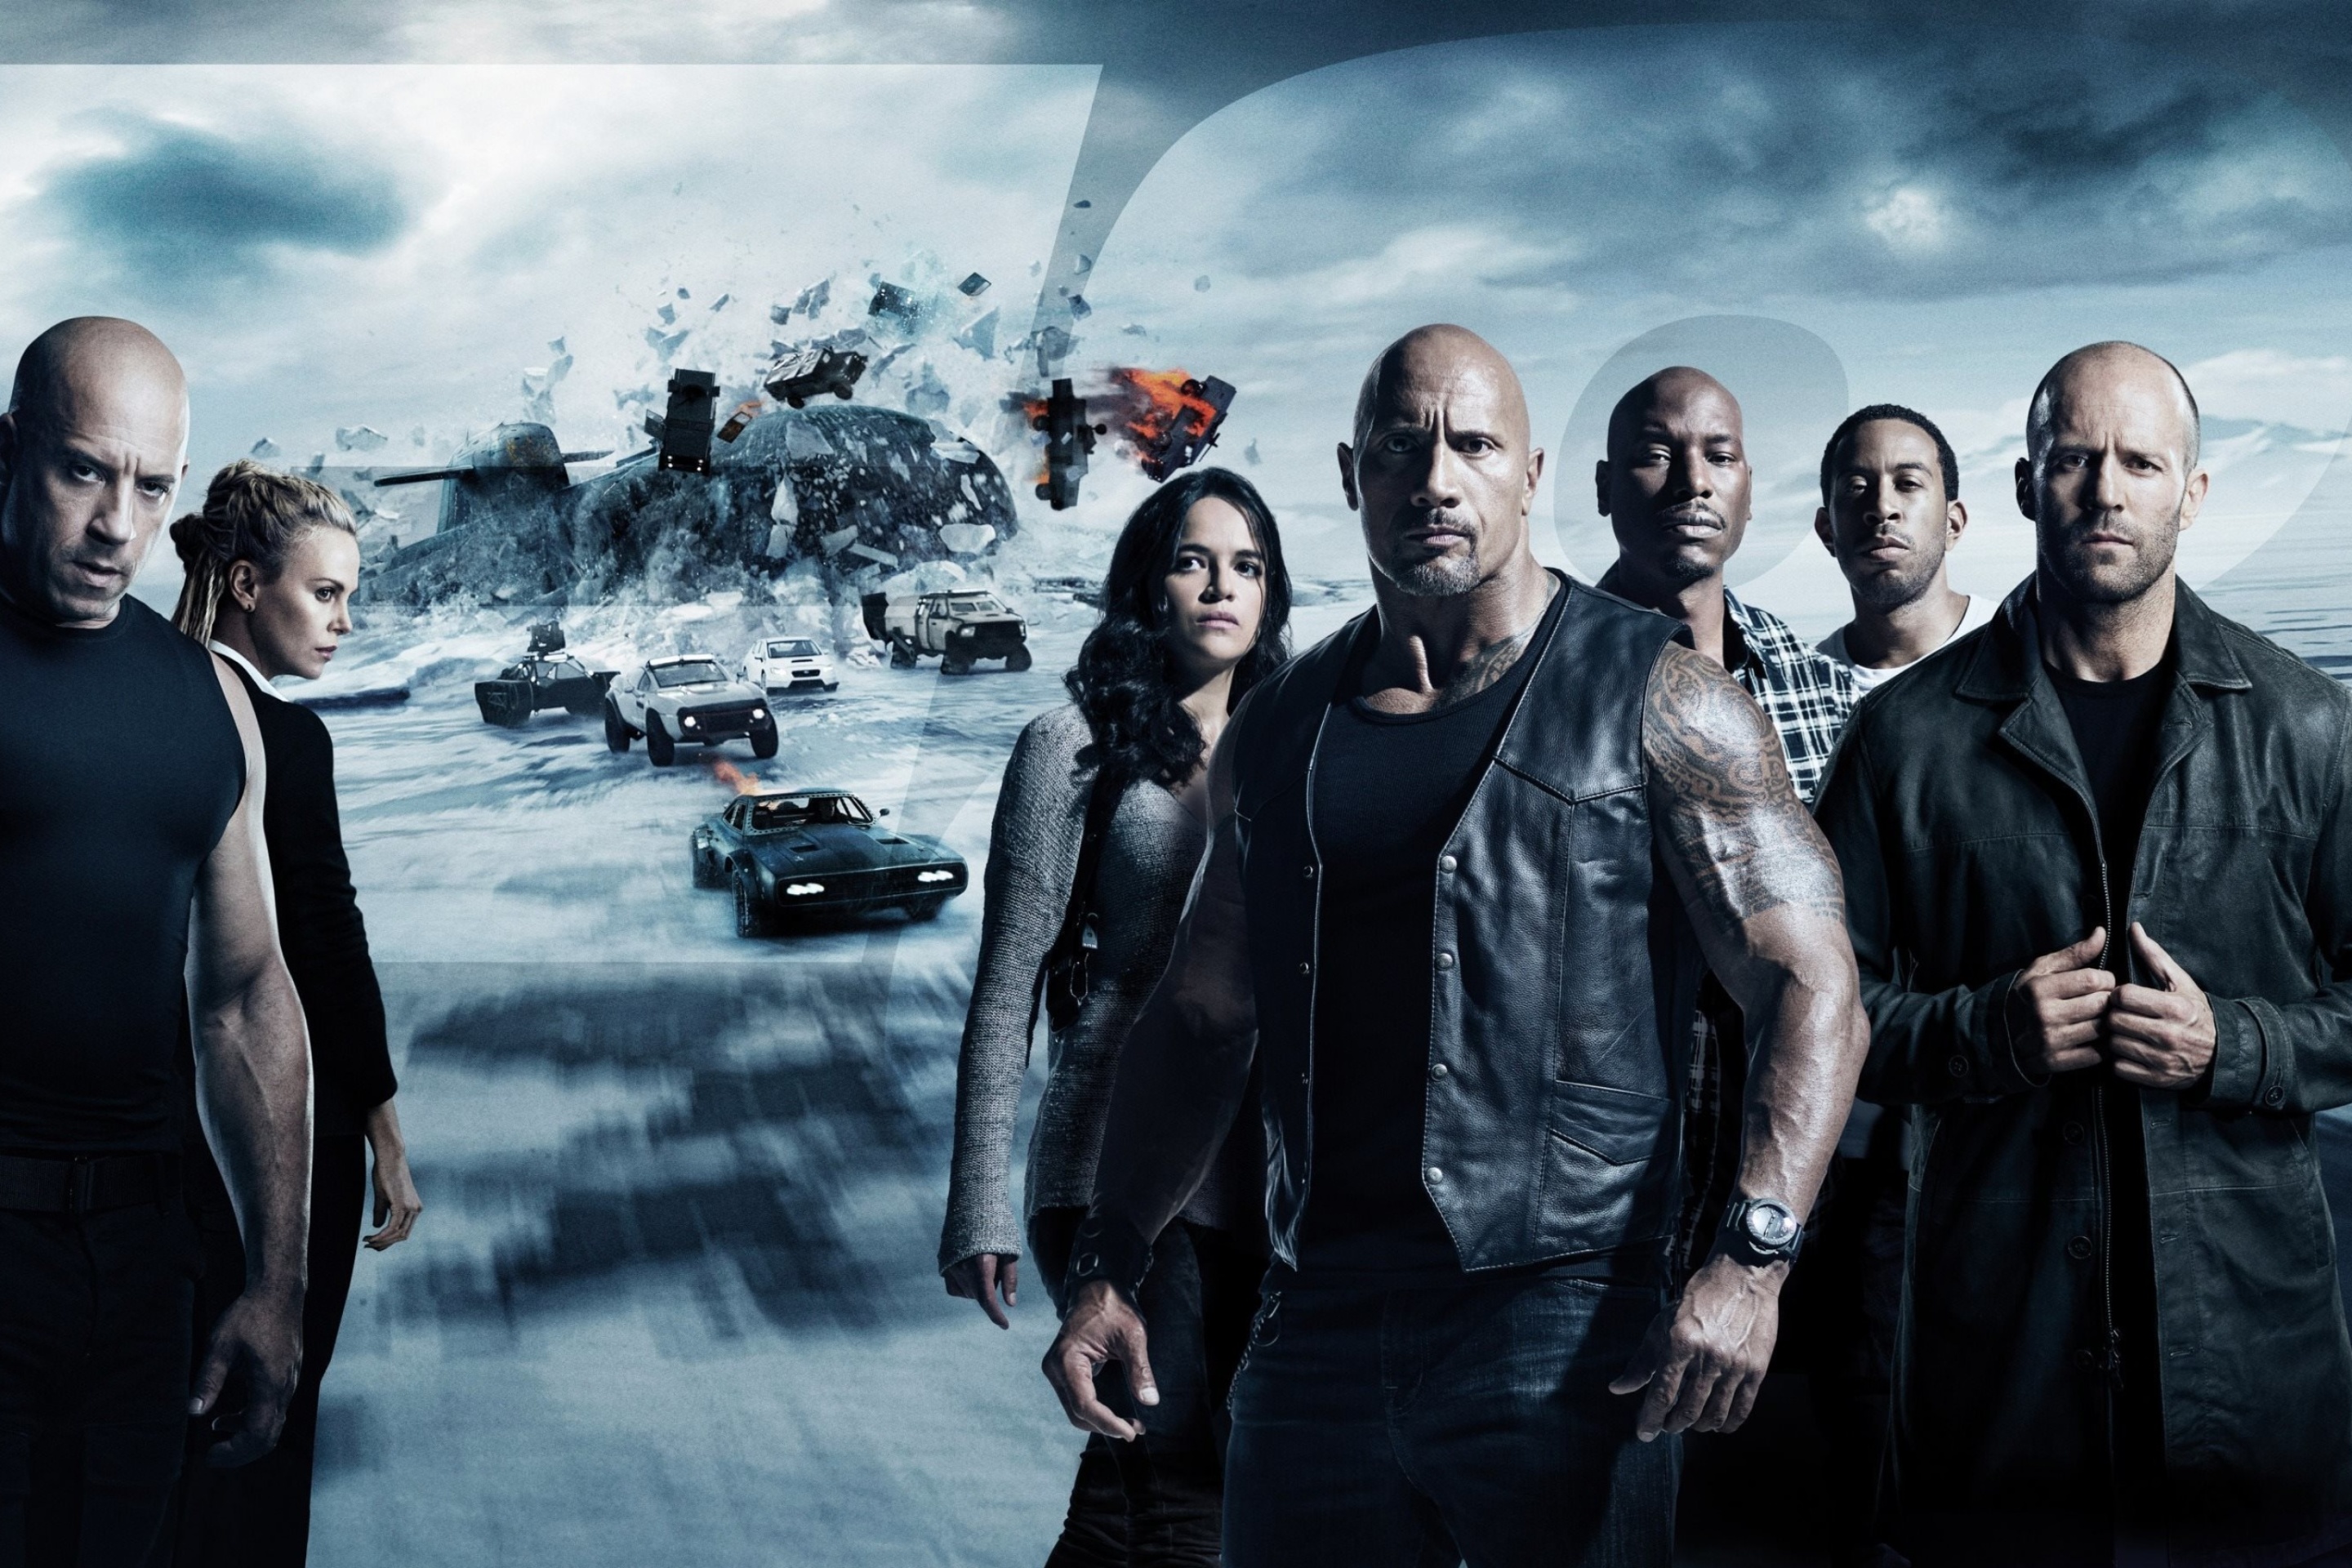 Fondo de pantalla The Fate of the Furious with Vin Diesel, Dwayne Johnson, Charlize Theron 2880x1920